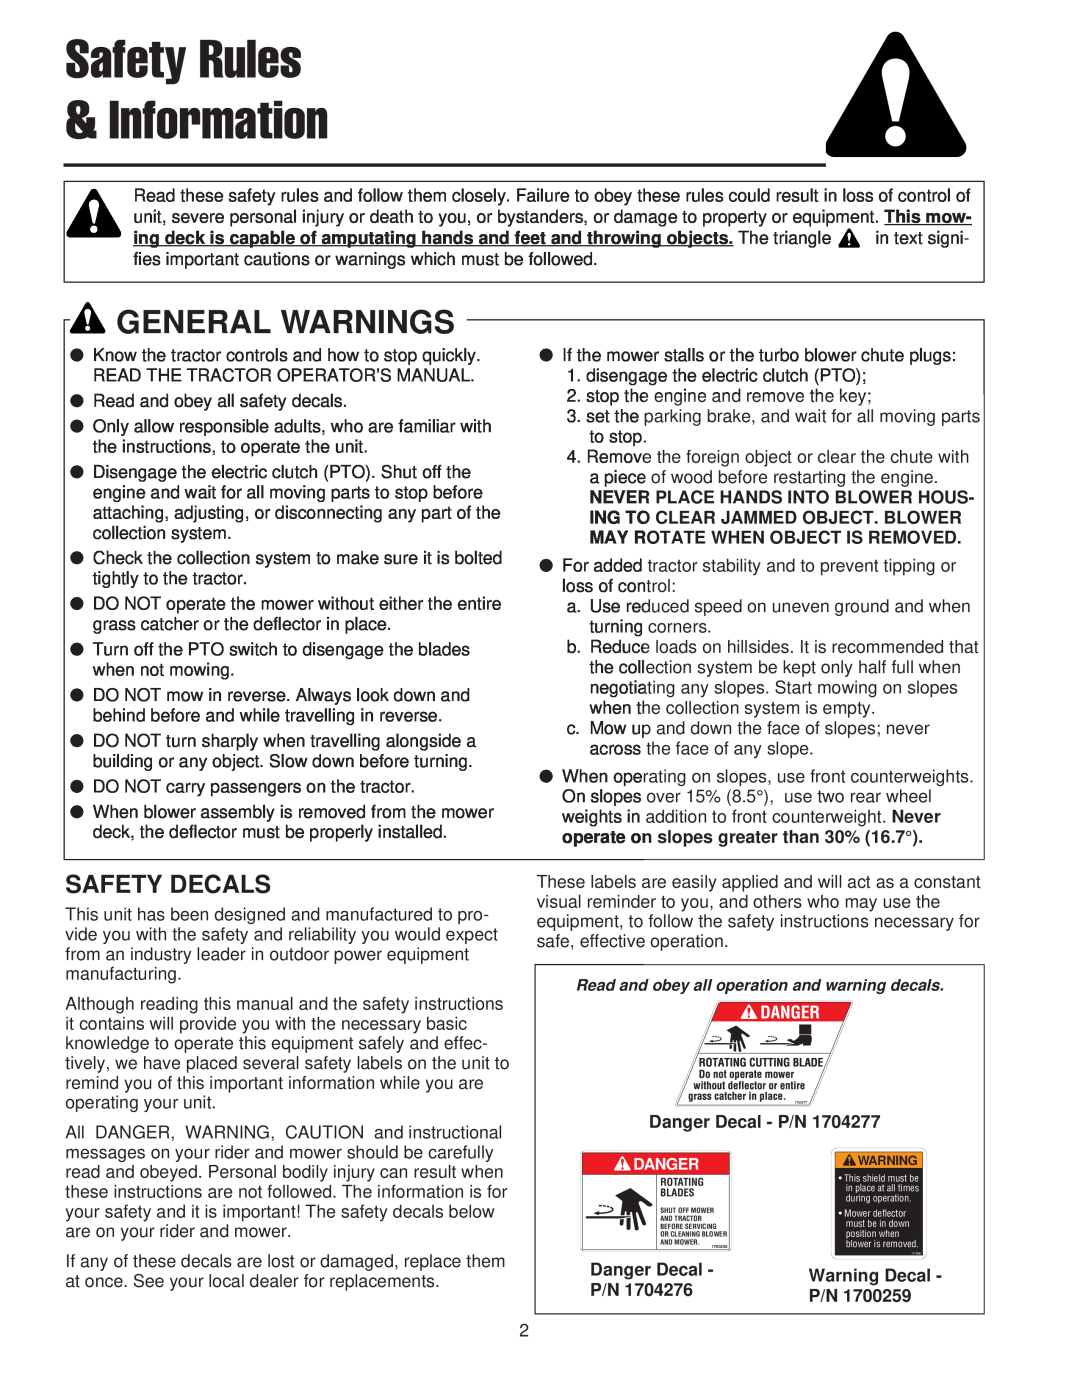 Snapper 1694496, 1726315-02 manual Safety Rules & Information, Safety Decals, General Warnings 